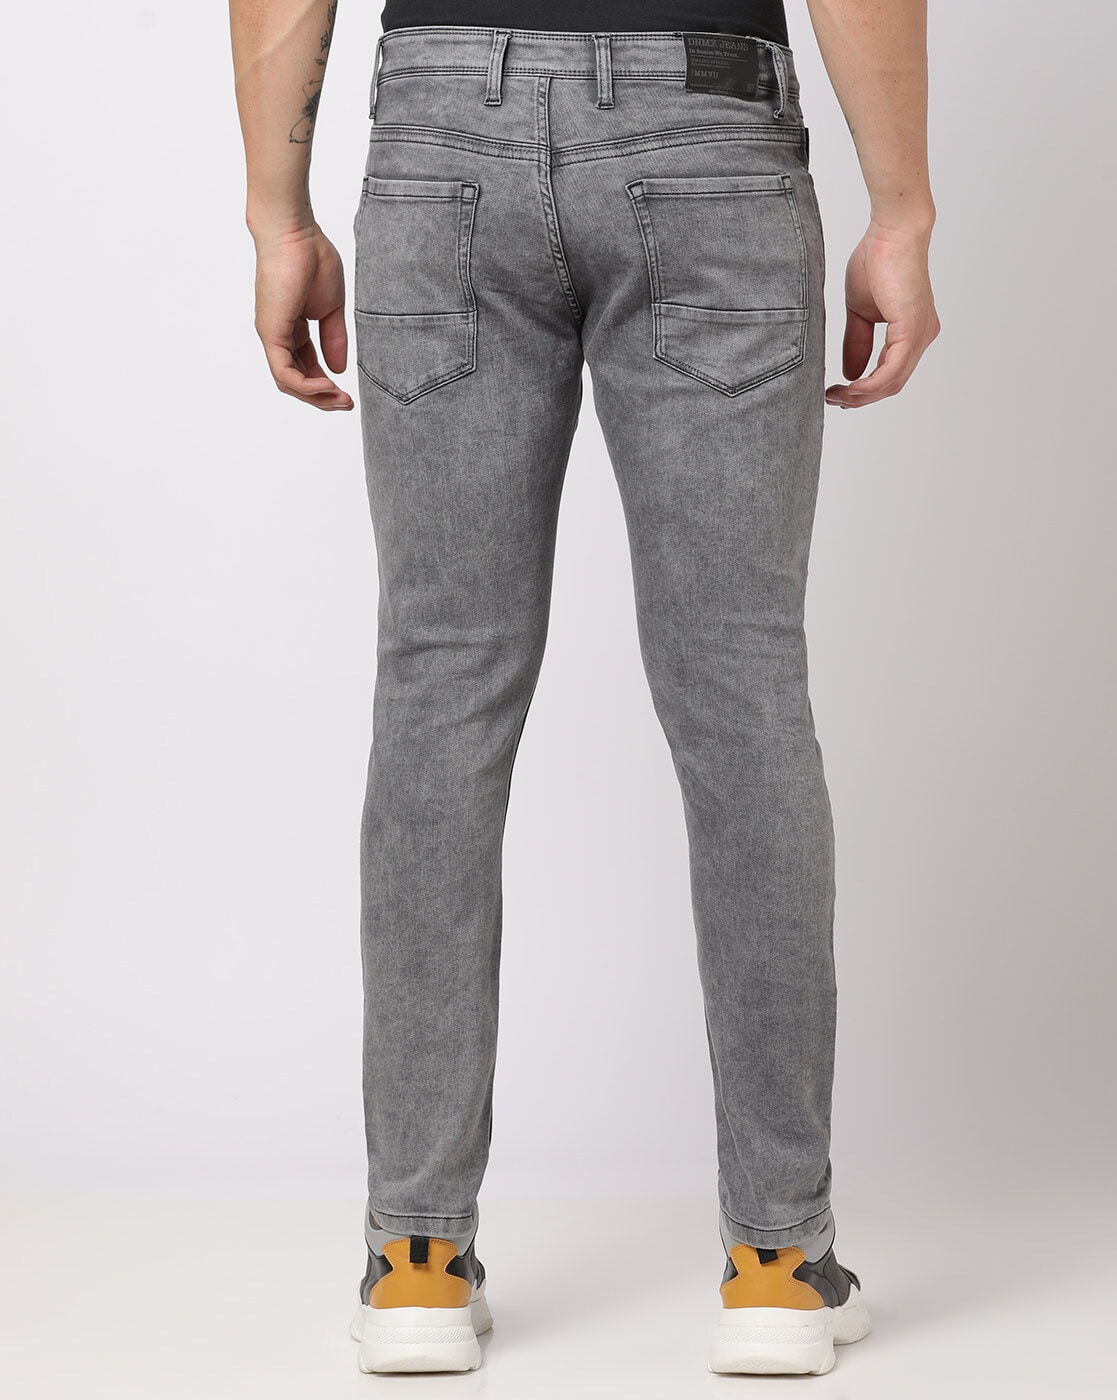 Men's High Waisted Jeans | High Rise Jeans for Men | 34 Heritage